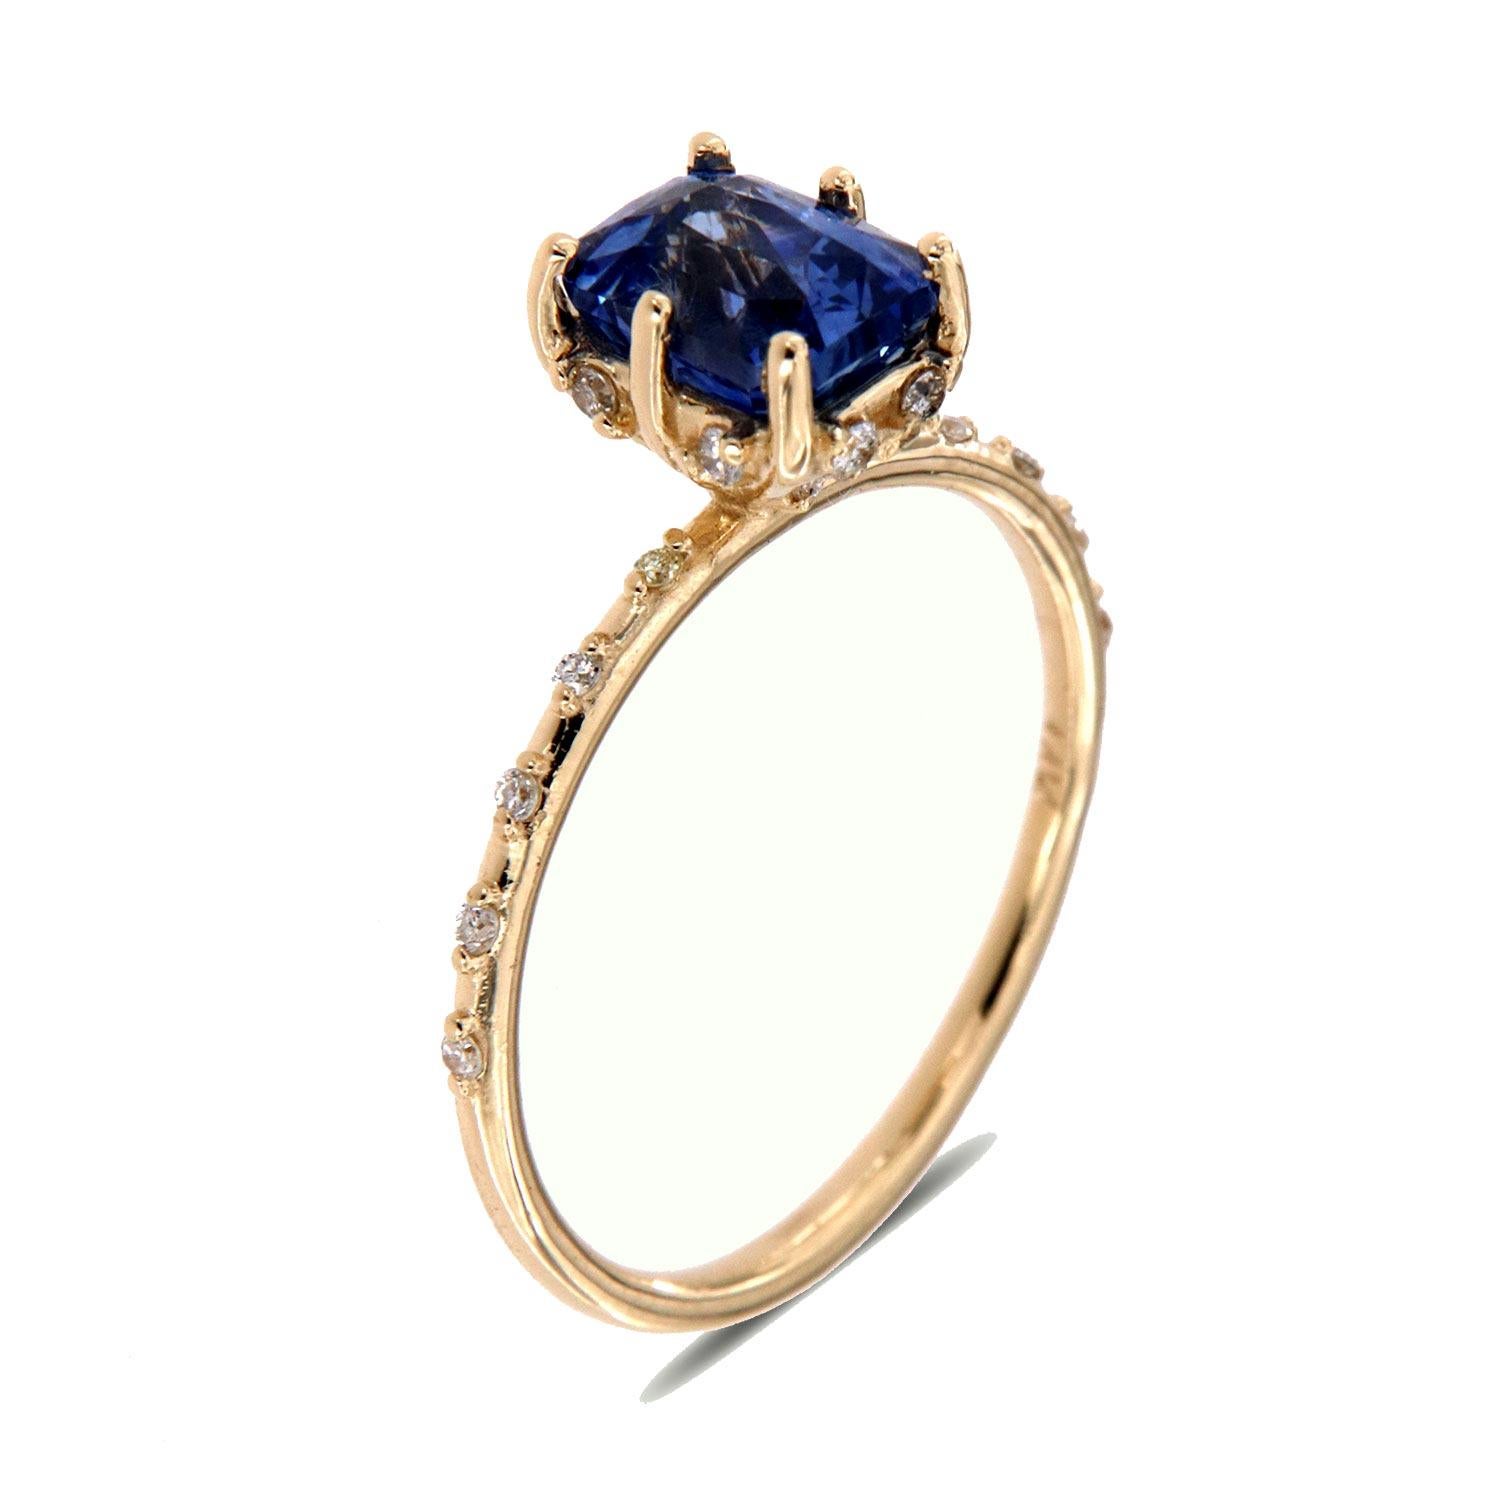 This Delicate ring features a one-of-a-kind Elongated Radiant Faceted 1.63 Carat Natural Non-Heated Light Blue Sapphire set in six (6) tiny prongs. Twelve (12) brilliant round diamonds evenly scattered underneath the crown on top of a 1.2 mm band